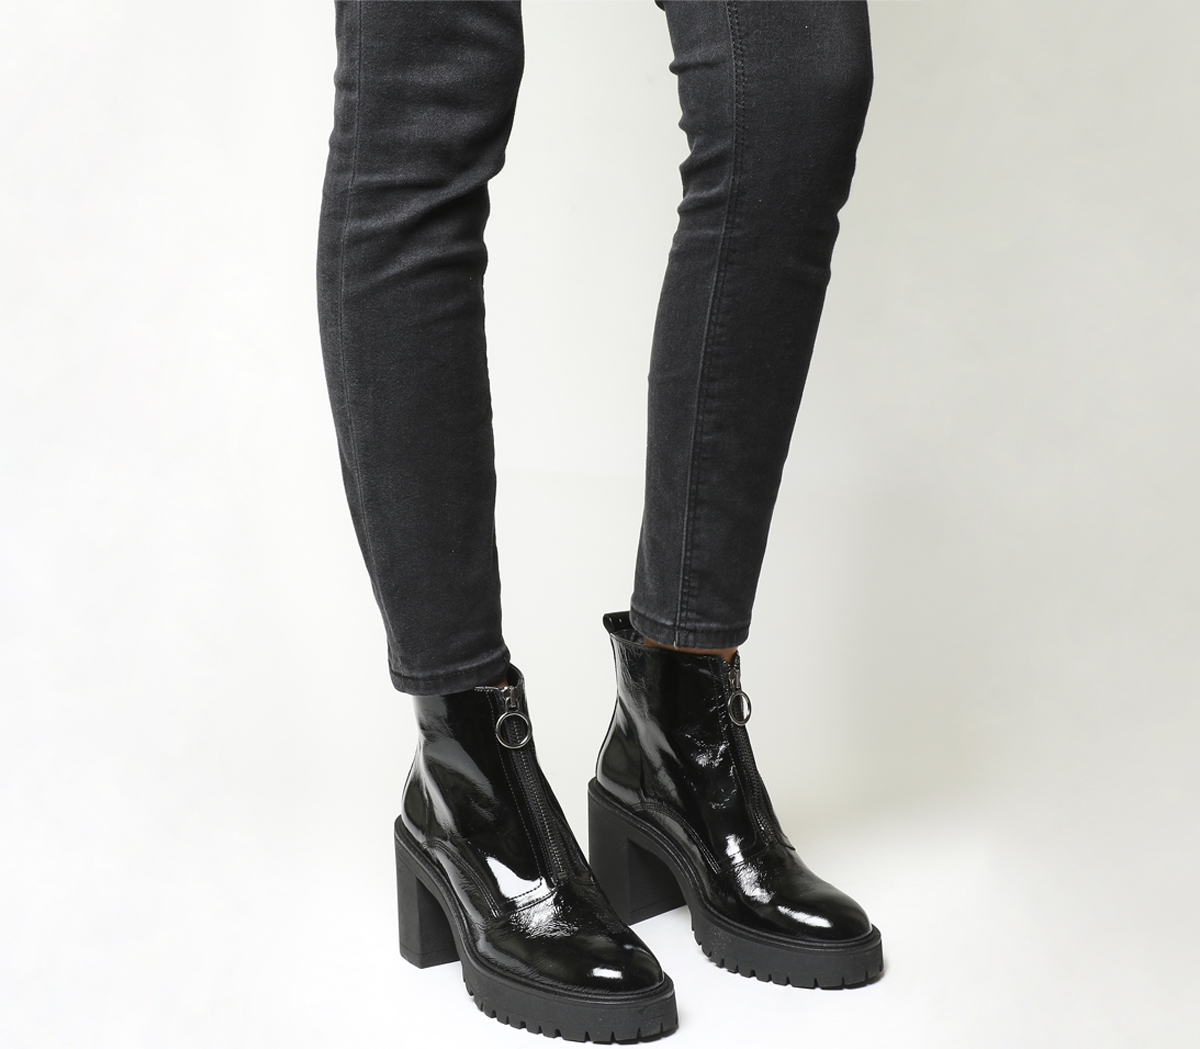 OFFICE Live A Little Chunky Boots Black Patent Leather - Women's Ankle ...